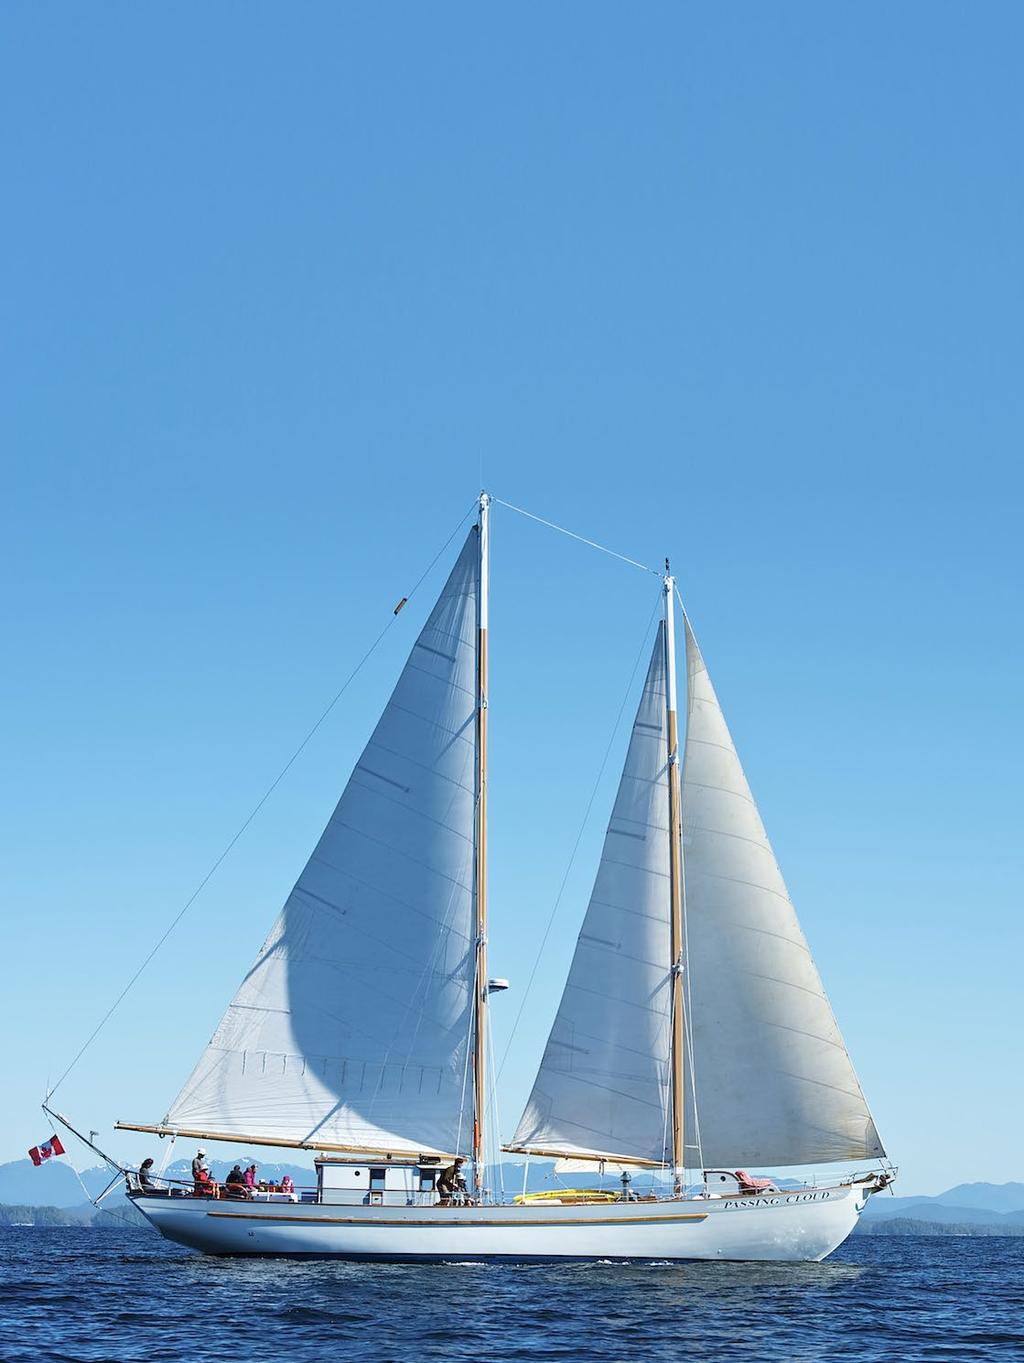 Schooner, Passing Cloud Comfort, Safety, & Sailing Ability Our home and vehicle for this expedition is our beautiful 70 classic wooden schooner, Passing Cloud.